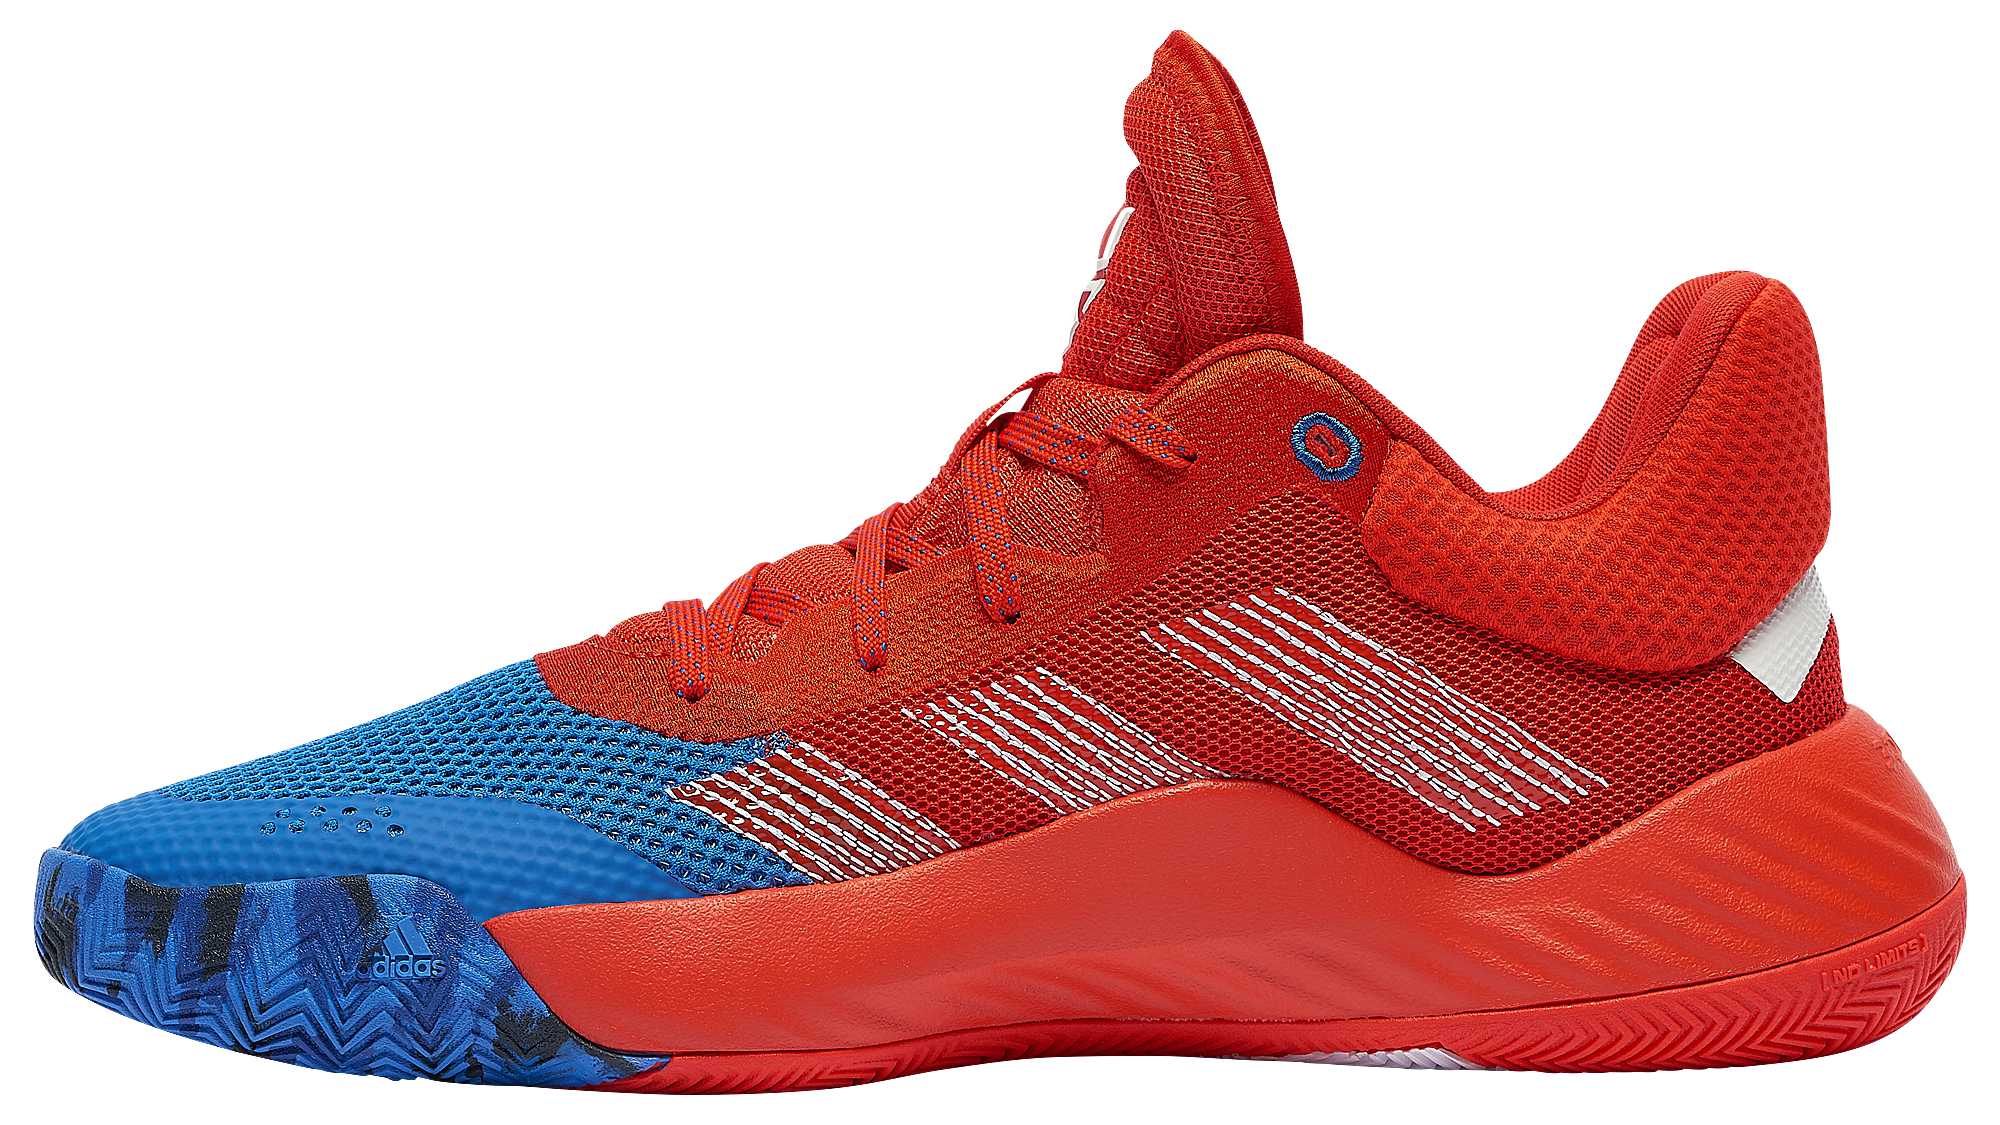 Adidas D.O.N. Issue 1 Blue Red White Release Date EF2400 Medial